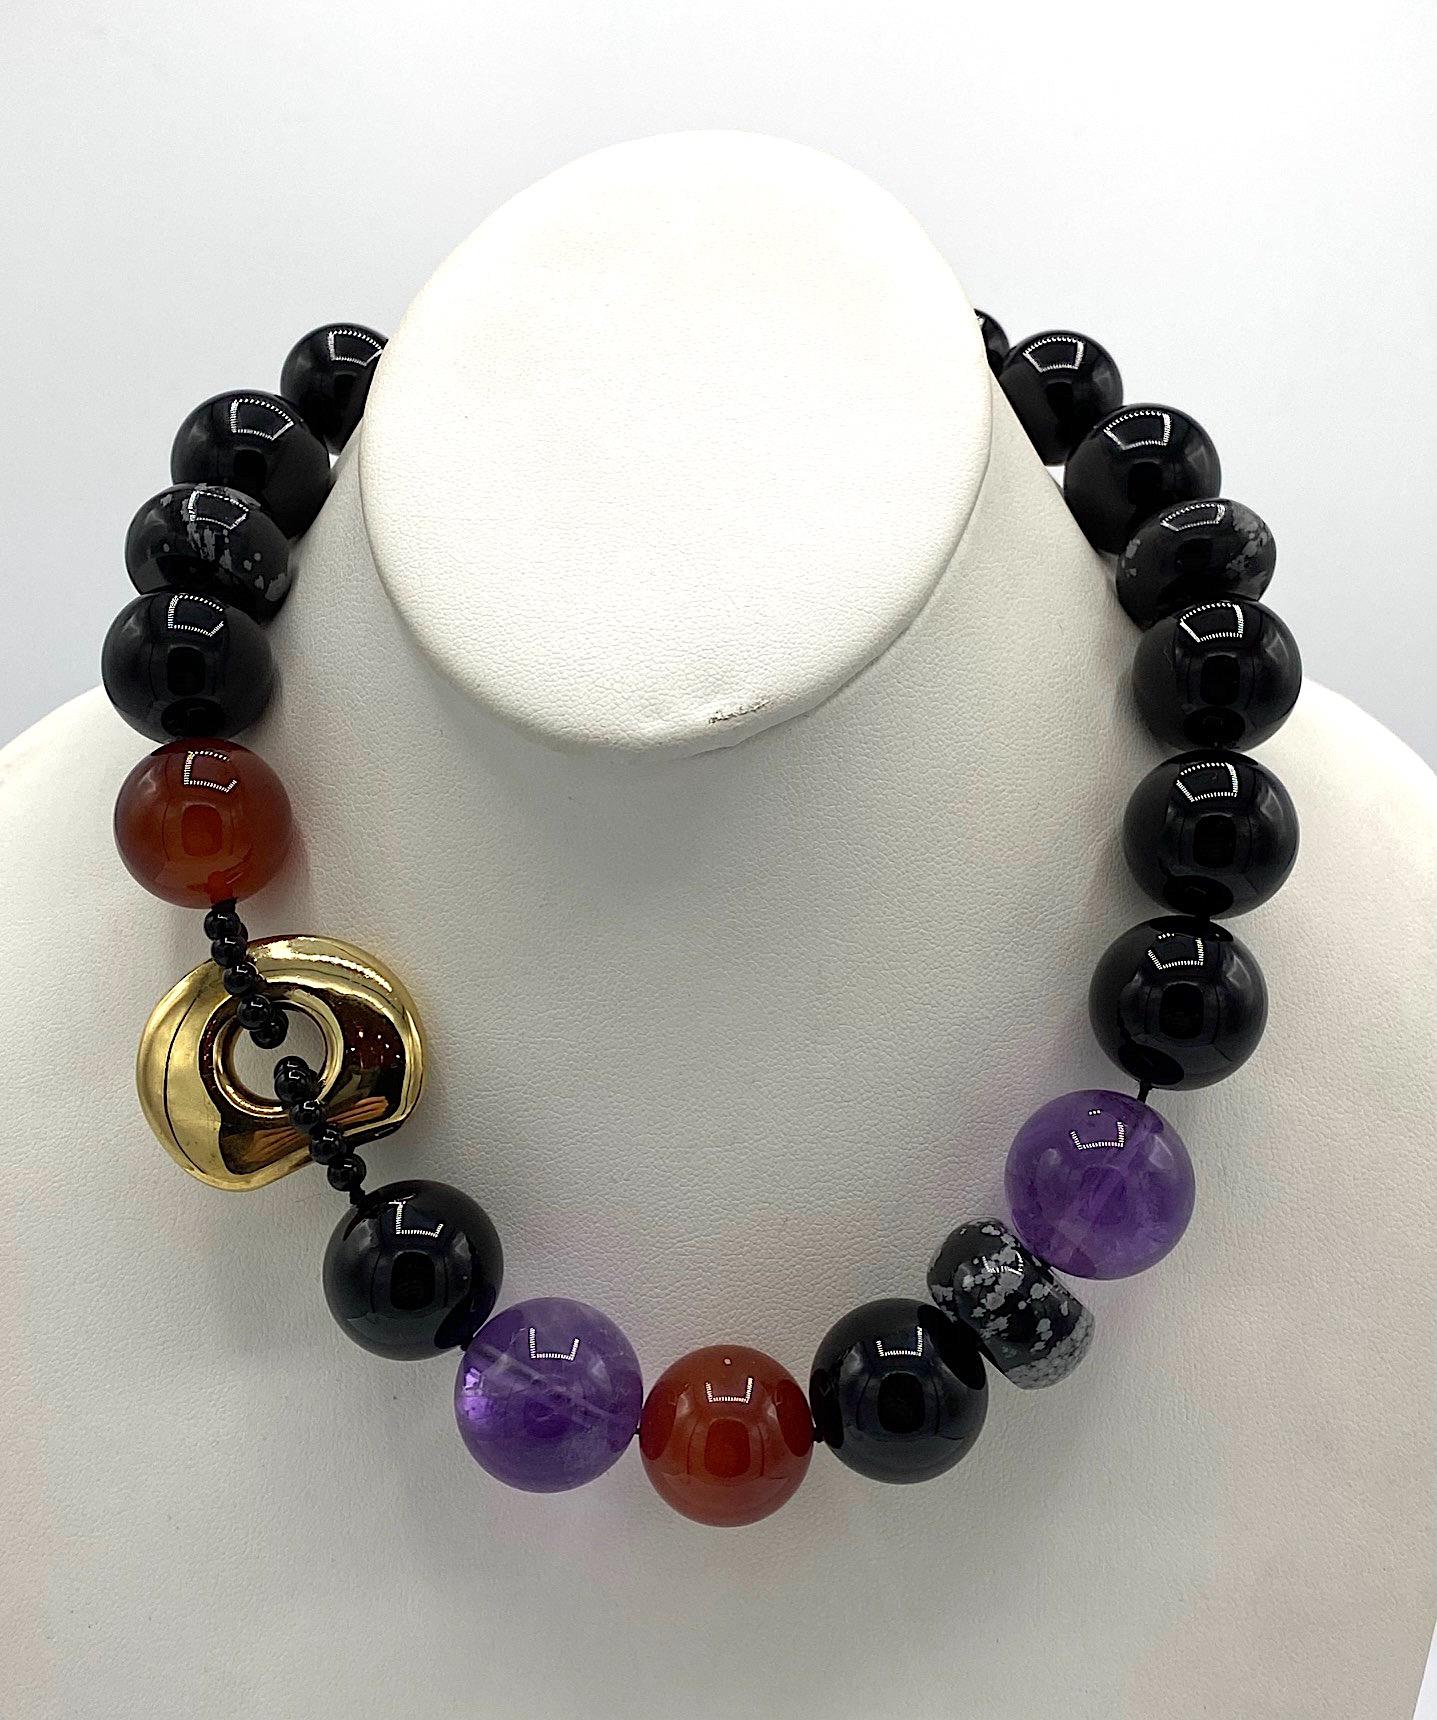 An elegant and striking strand of large semi precious beads with a gold on sterling silver vermeil decorative ring by Kai-Yin Lo. The necklace measures 18 inches long and has a gold on sterling silver hook and eye clasp. The hook is stamped Kylo and